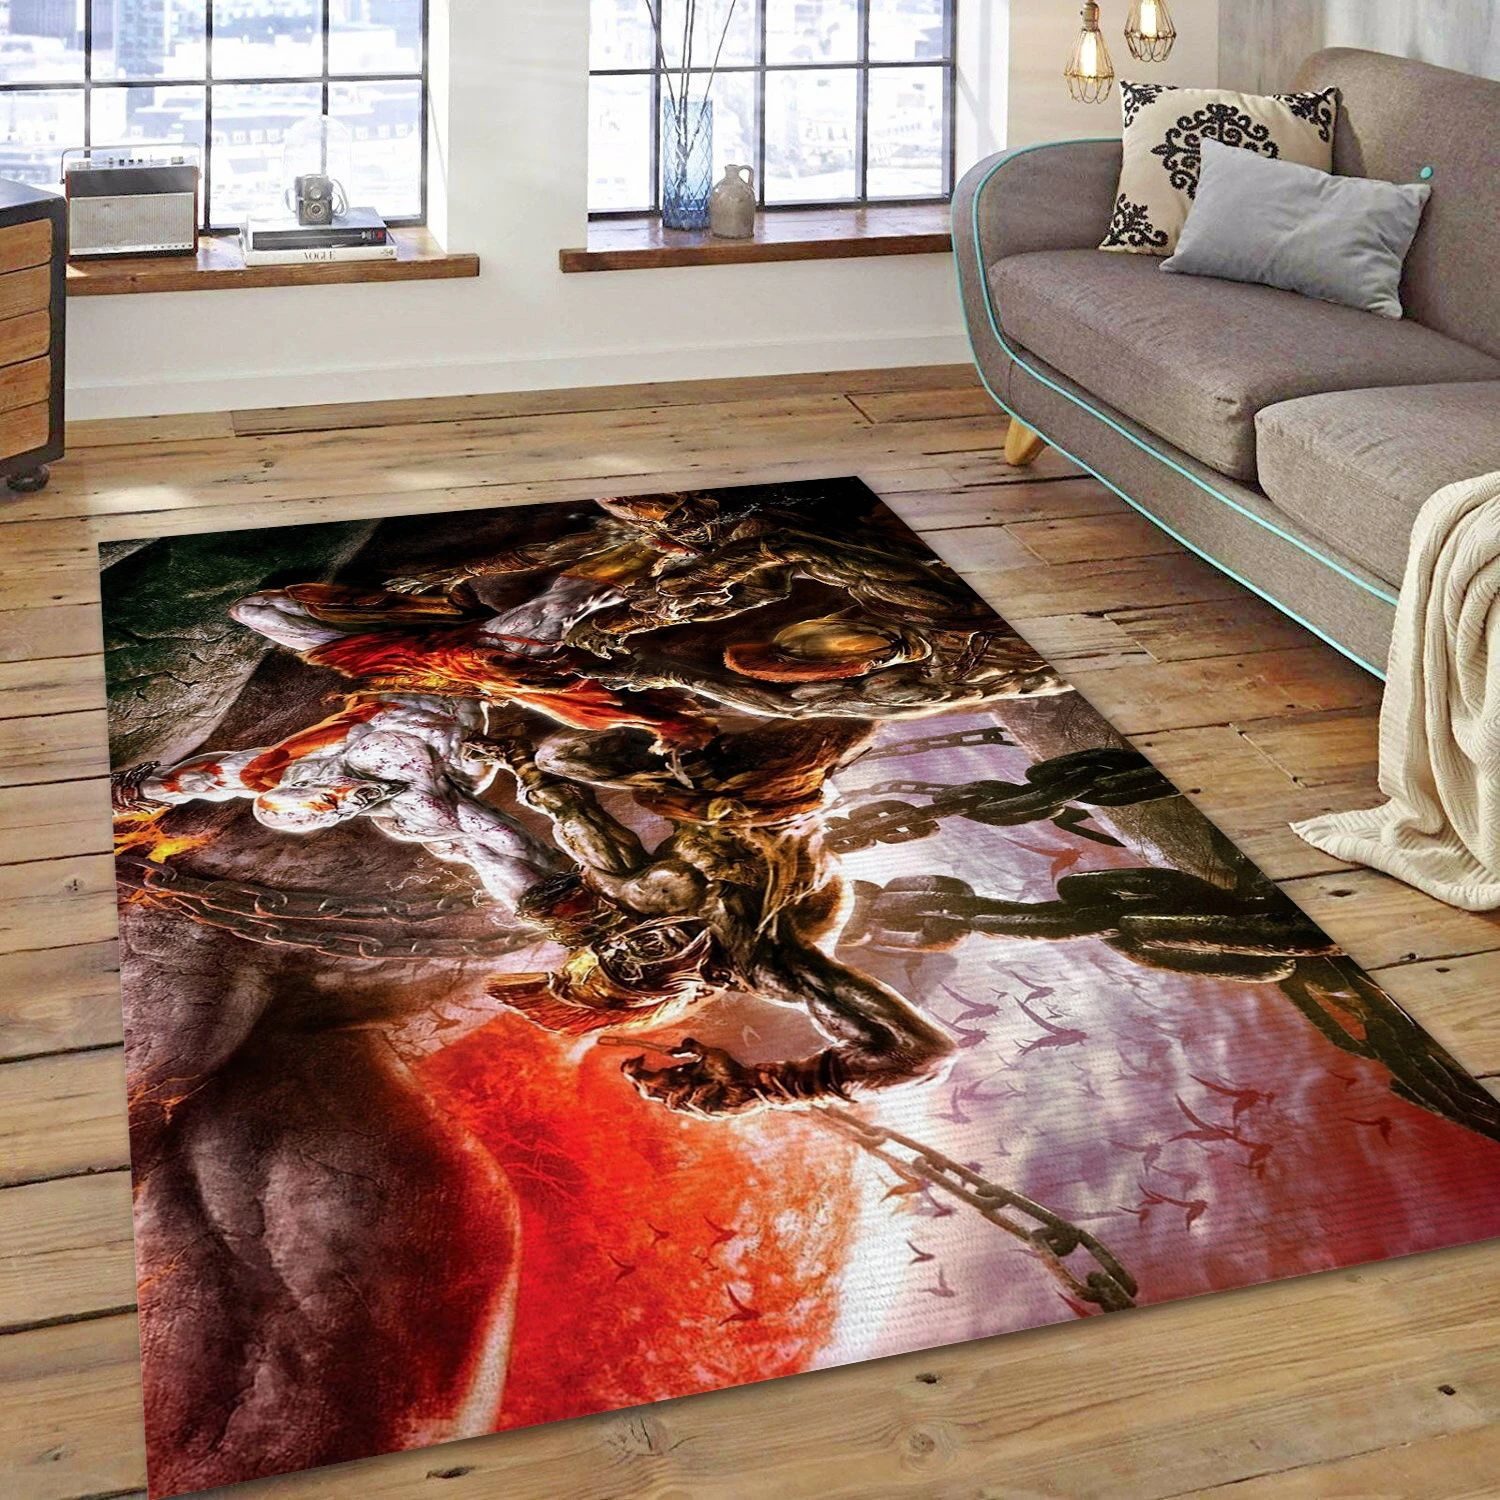 God Of War Video Game Area Rug Area, Living Room Rug - Christmas Gift Decor - Indoor Outdoor Rugs